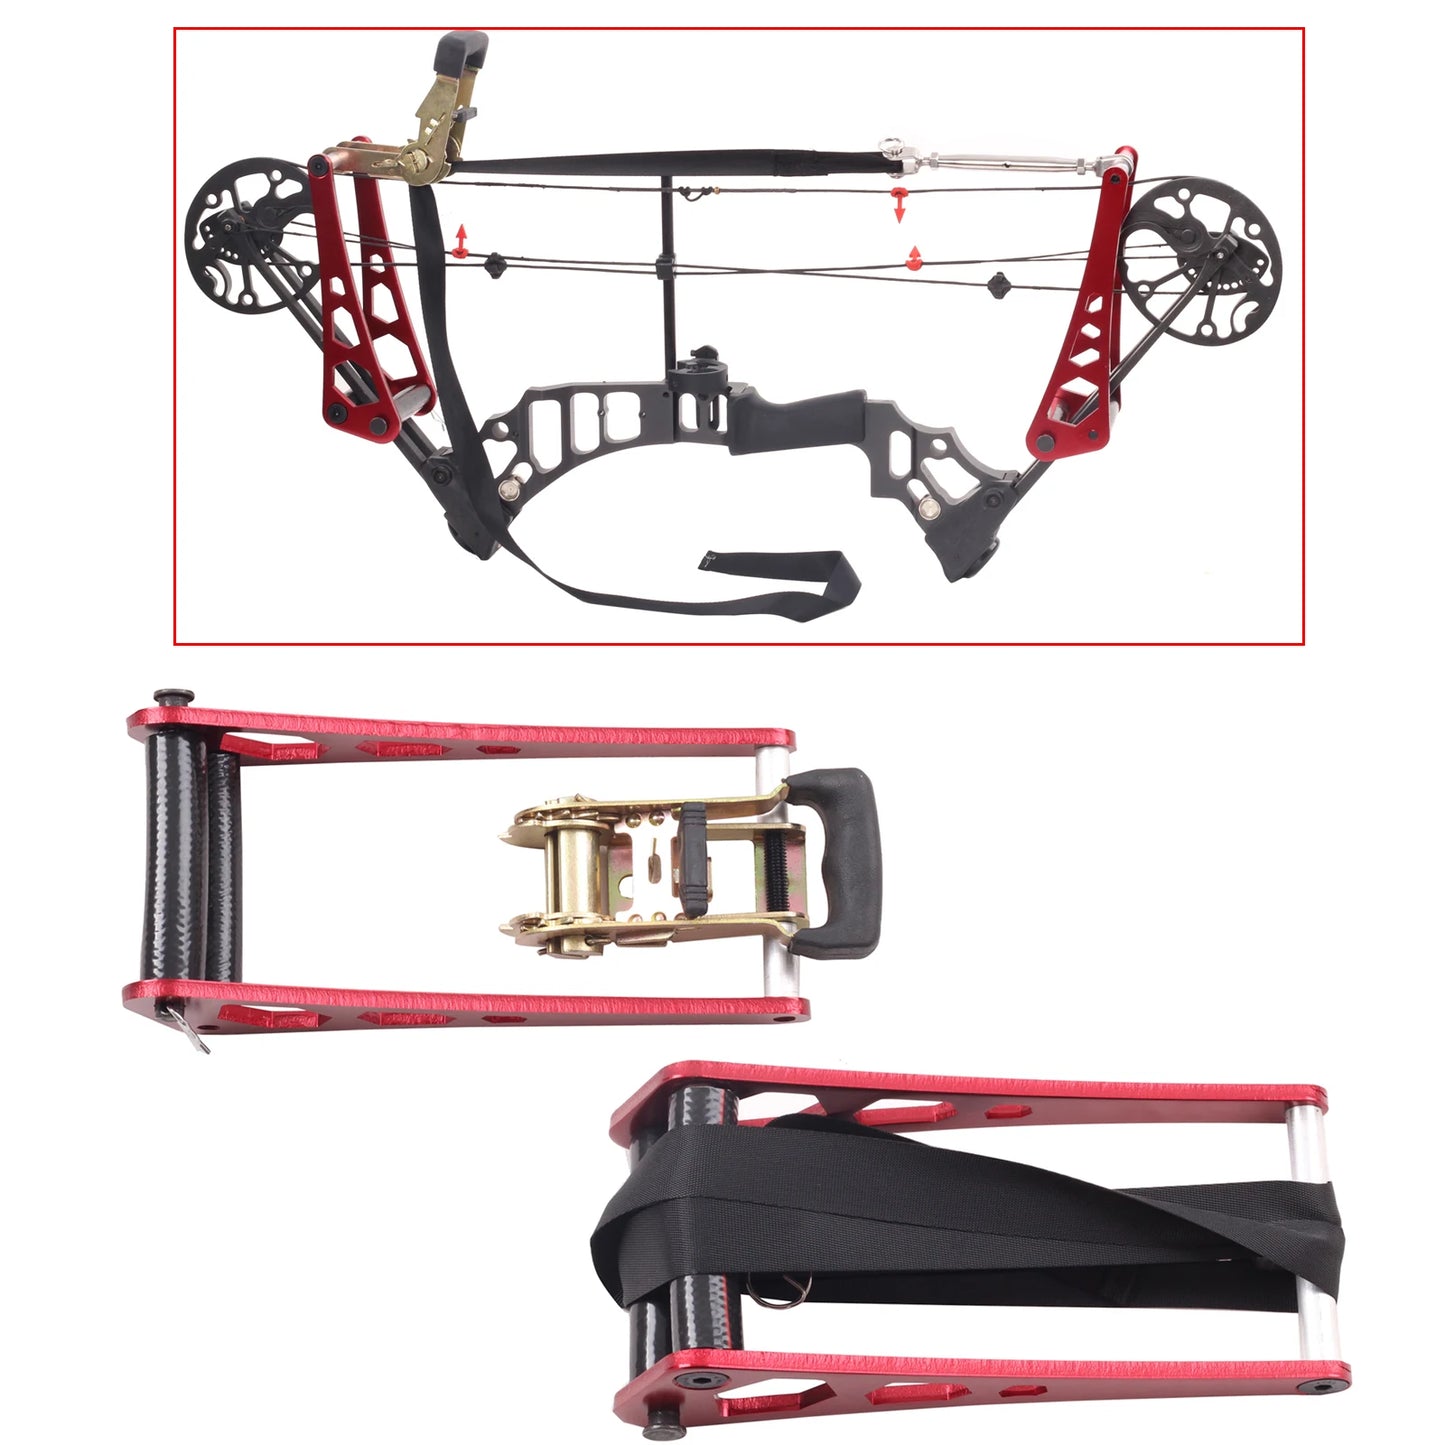 Handheld Compound Bow Press Portable Ratchet-Loc Press Aluminum Alloy Bow Press High-Quality Archery Bow Opener